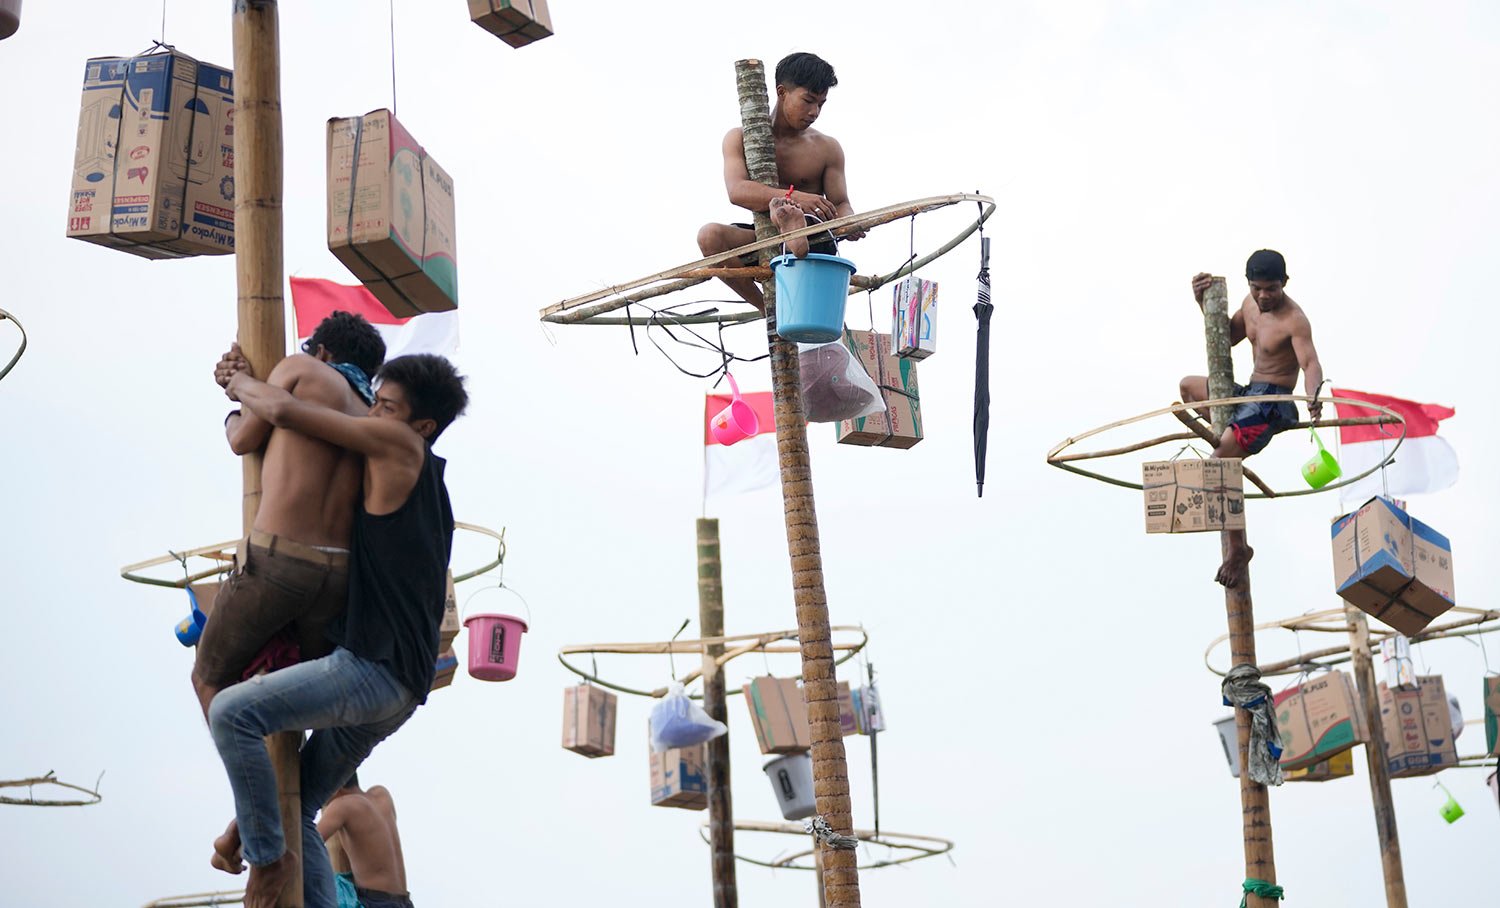  Participants retrieve prizes after climbing up a greased pole during a greased-pole climbing competition held as a part of Independence Day celebrations at Ancol Beach in Jakarta, Indonesia Wednesday, Aug. 17, 2022.  (AP Photo/Tatan Syuflana) 